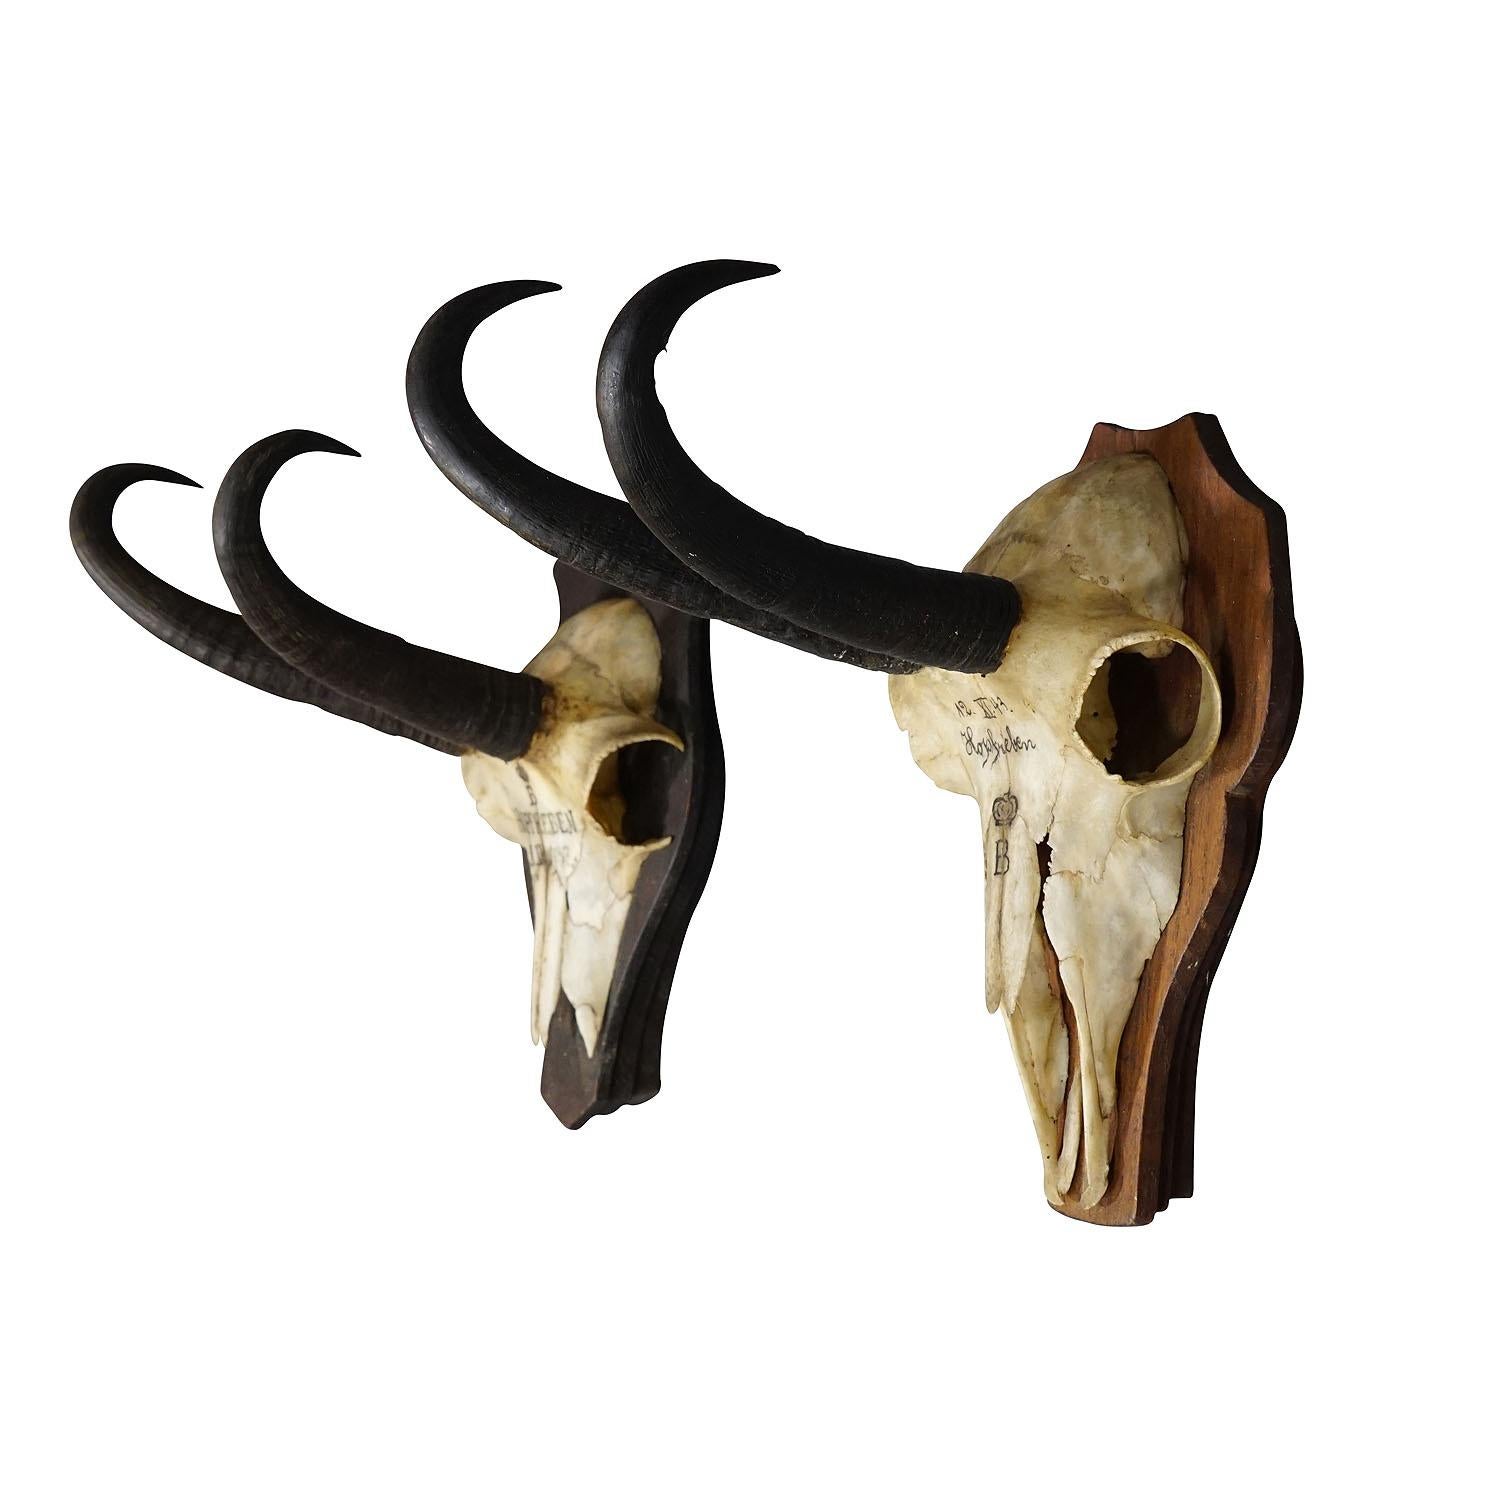 Pair Antique Chamois trophies on wooden plaques Germany ca. 1930s

A pair of antique Black Forest chamois trophies on wooden plaques with brown staining. Originating from the stately home of Palace Salem in South Germany. Shot by members of the